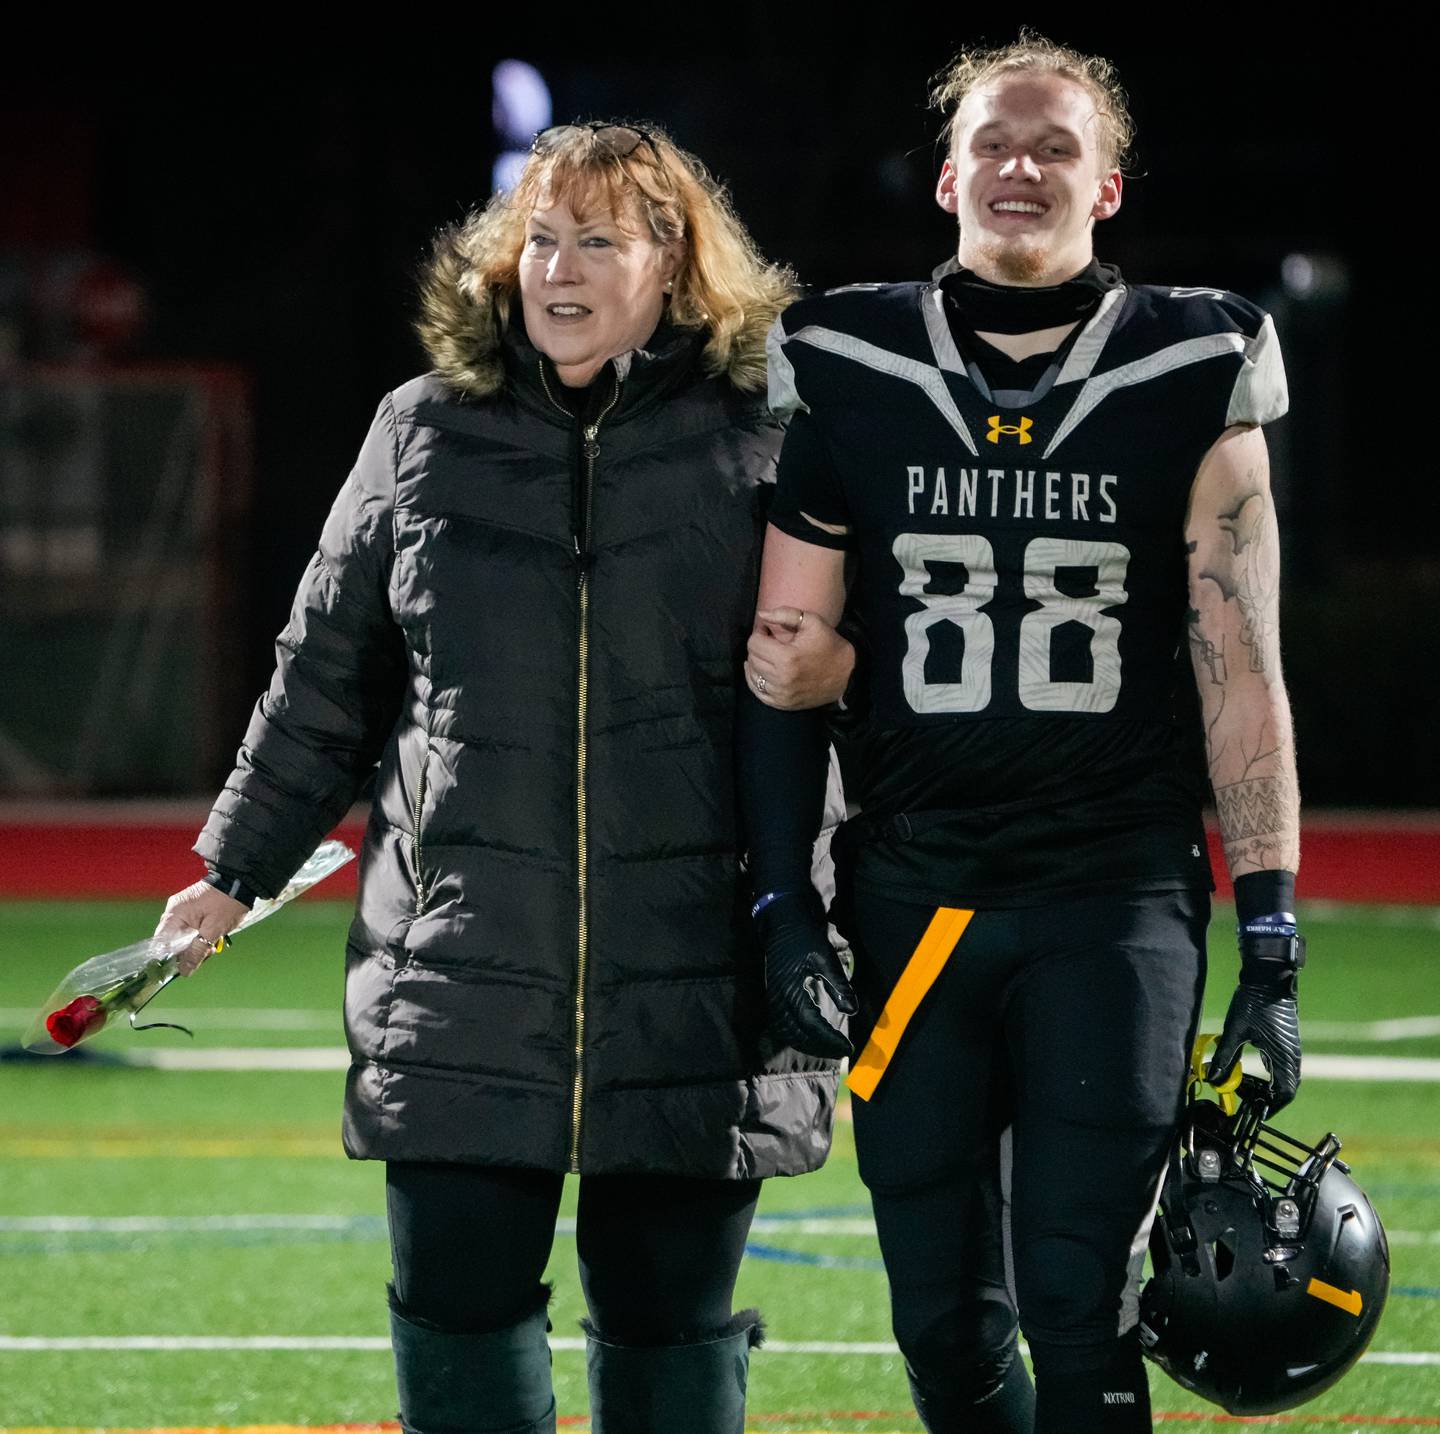 St. Frances senior tight end Chase Wilkens walks with his mom as he’s honored during senior night at Under Armour Stadium, which was their final home game of the season, on Friday, Nov. 10, 2023.